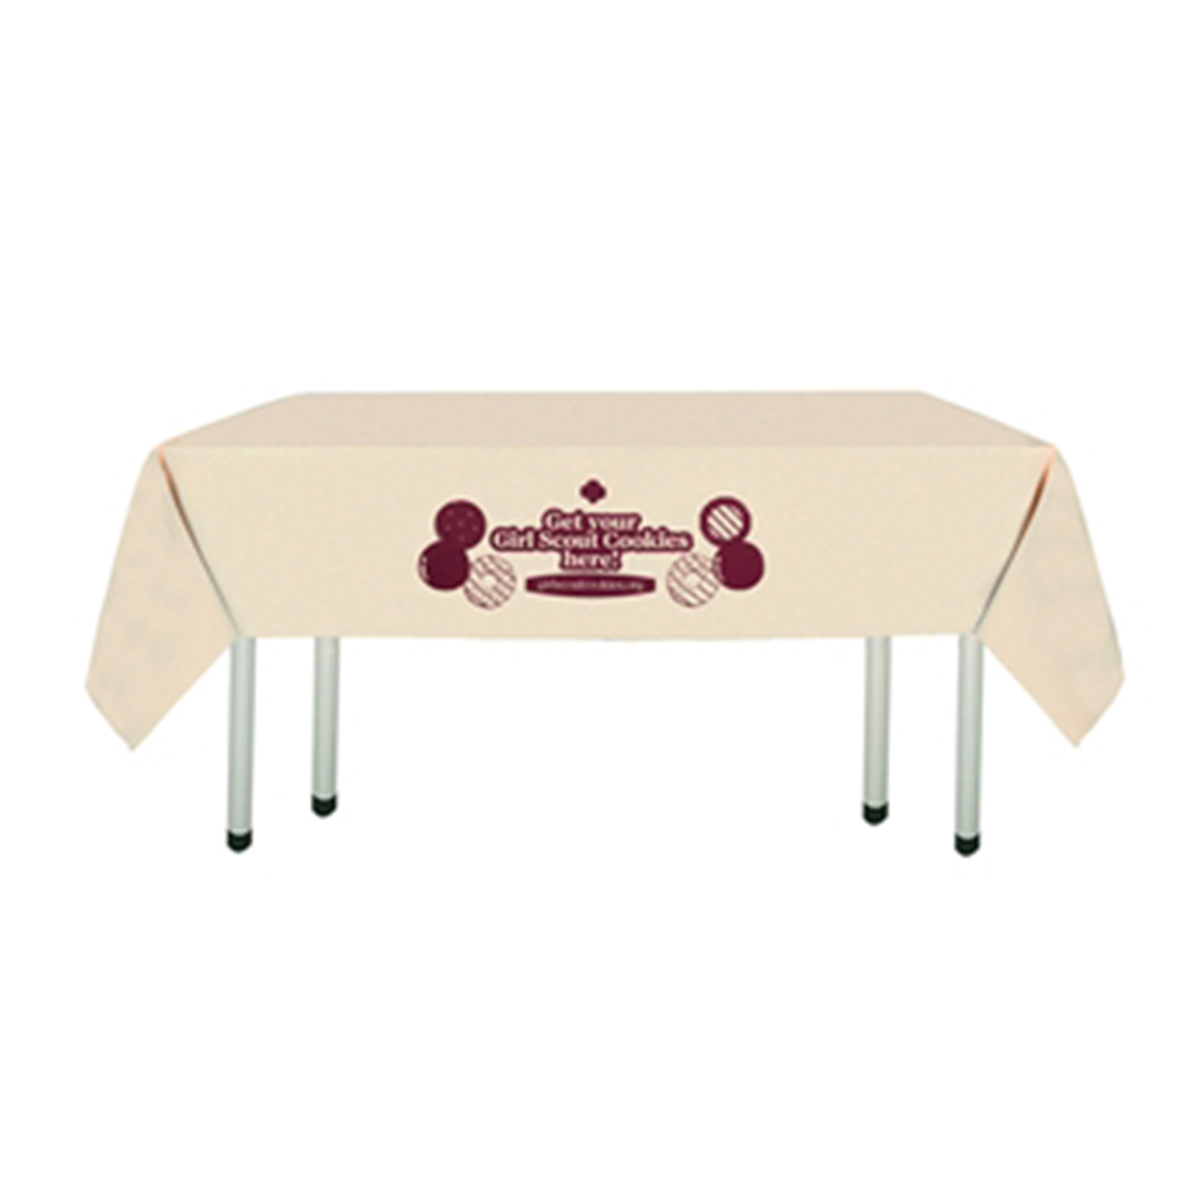 Tan Cookie Tablecloth